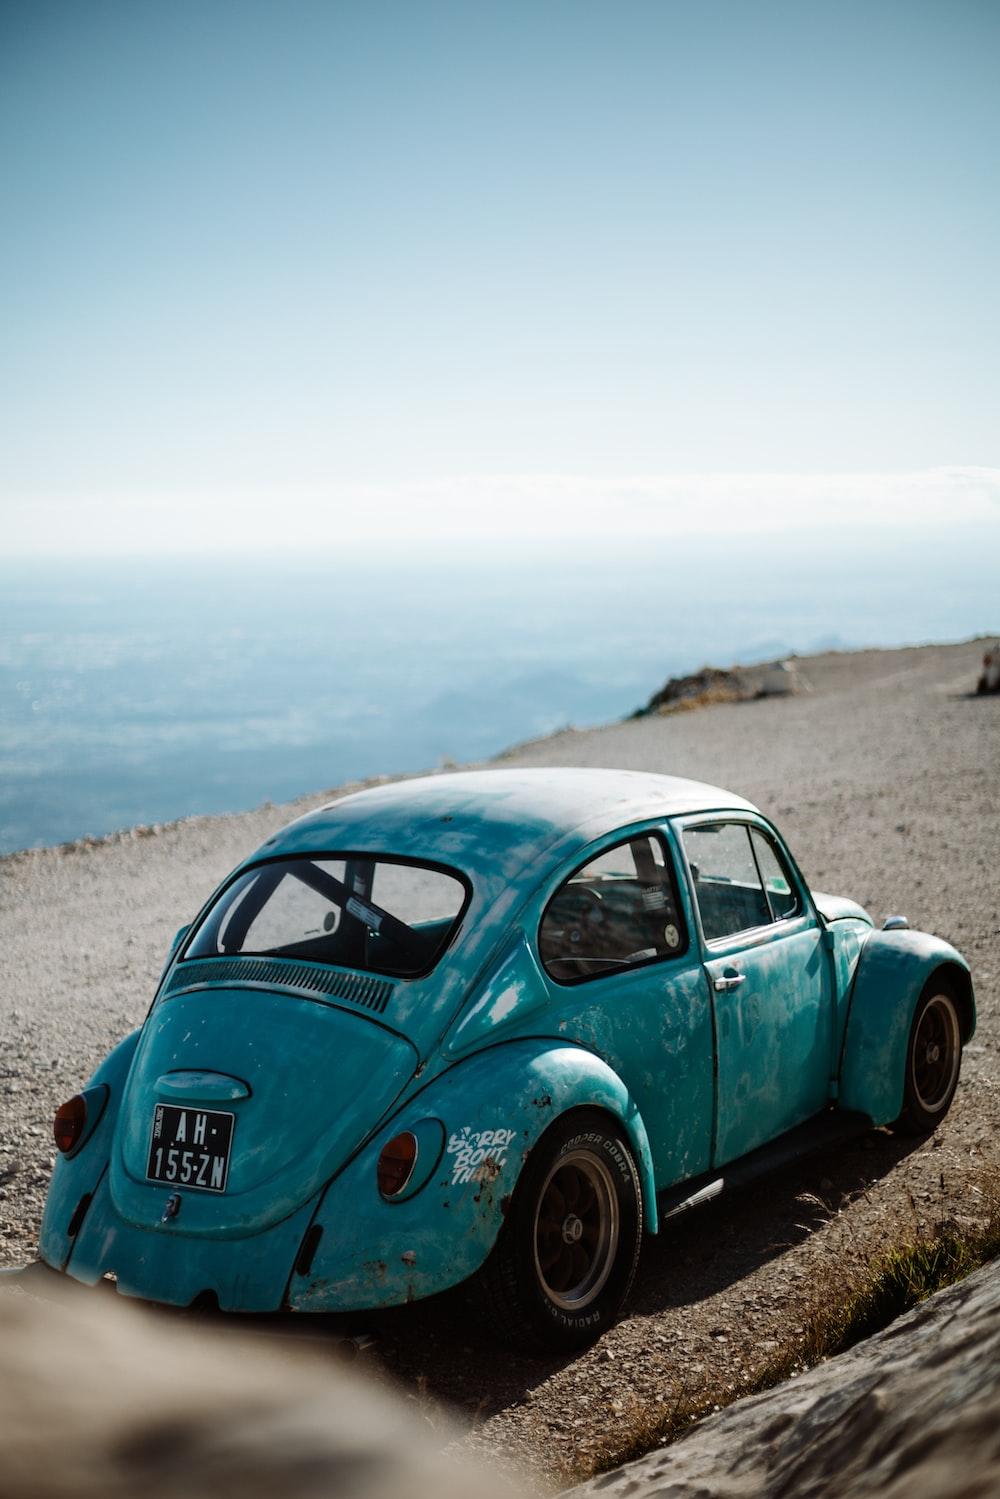 Green Volkswagen Beetle On Brown Sand During Daytime Photo